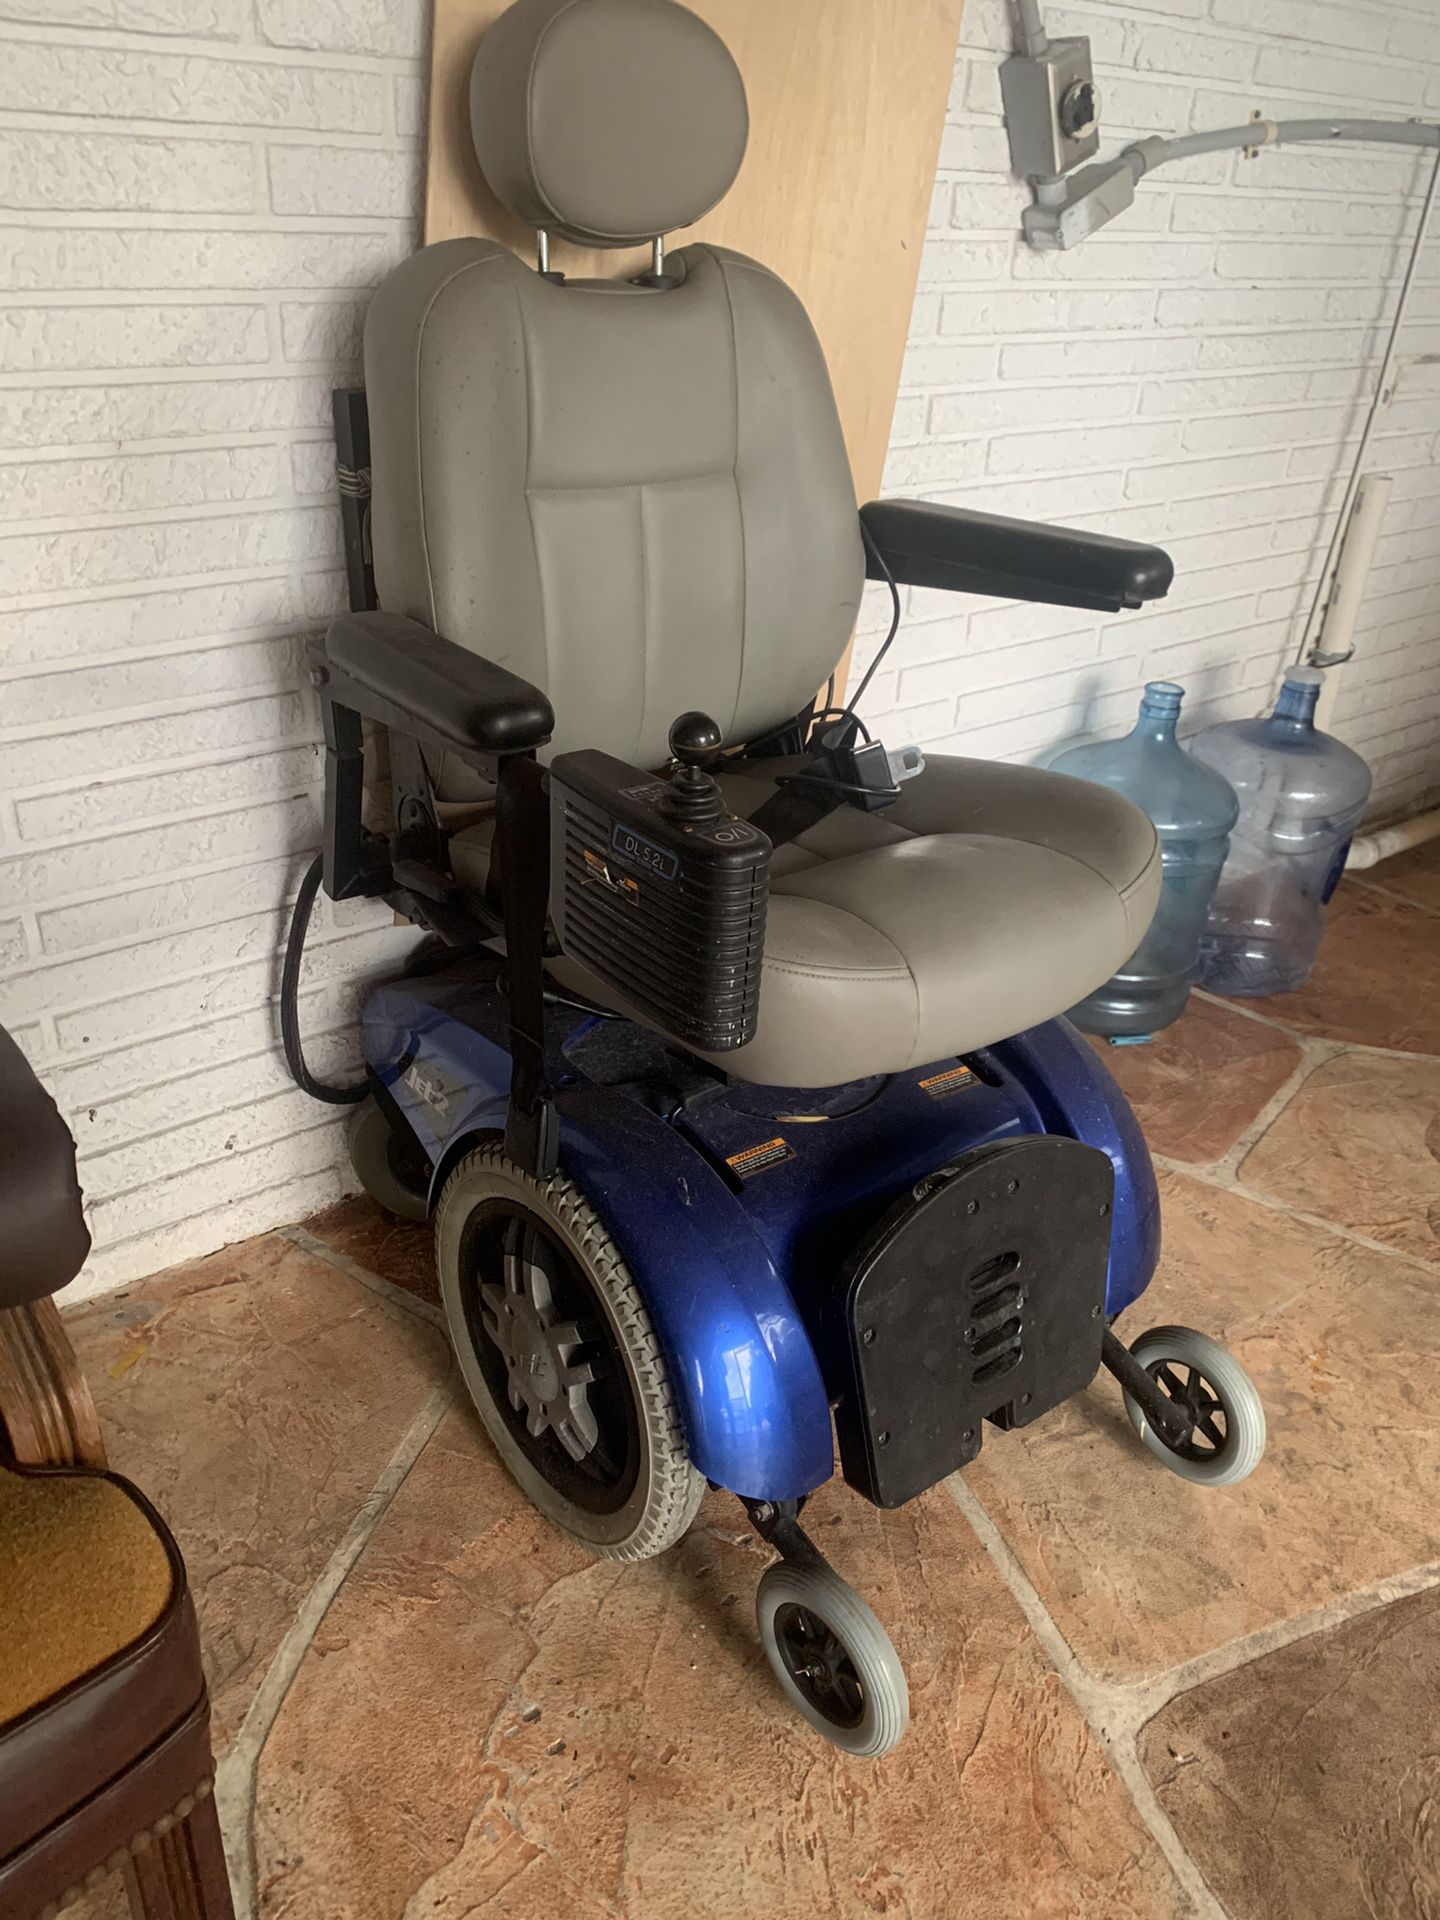 Jet2 Pride Mobility Chair